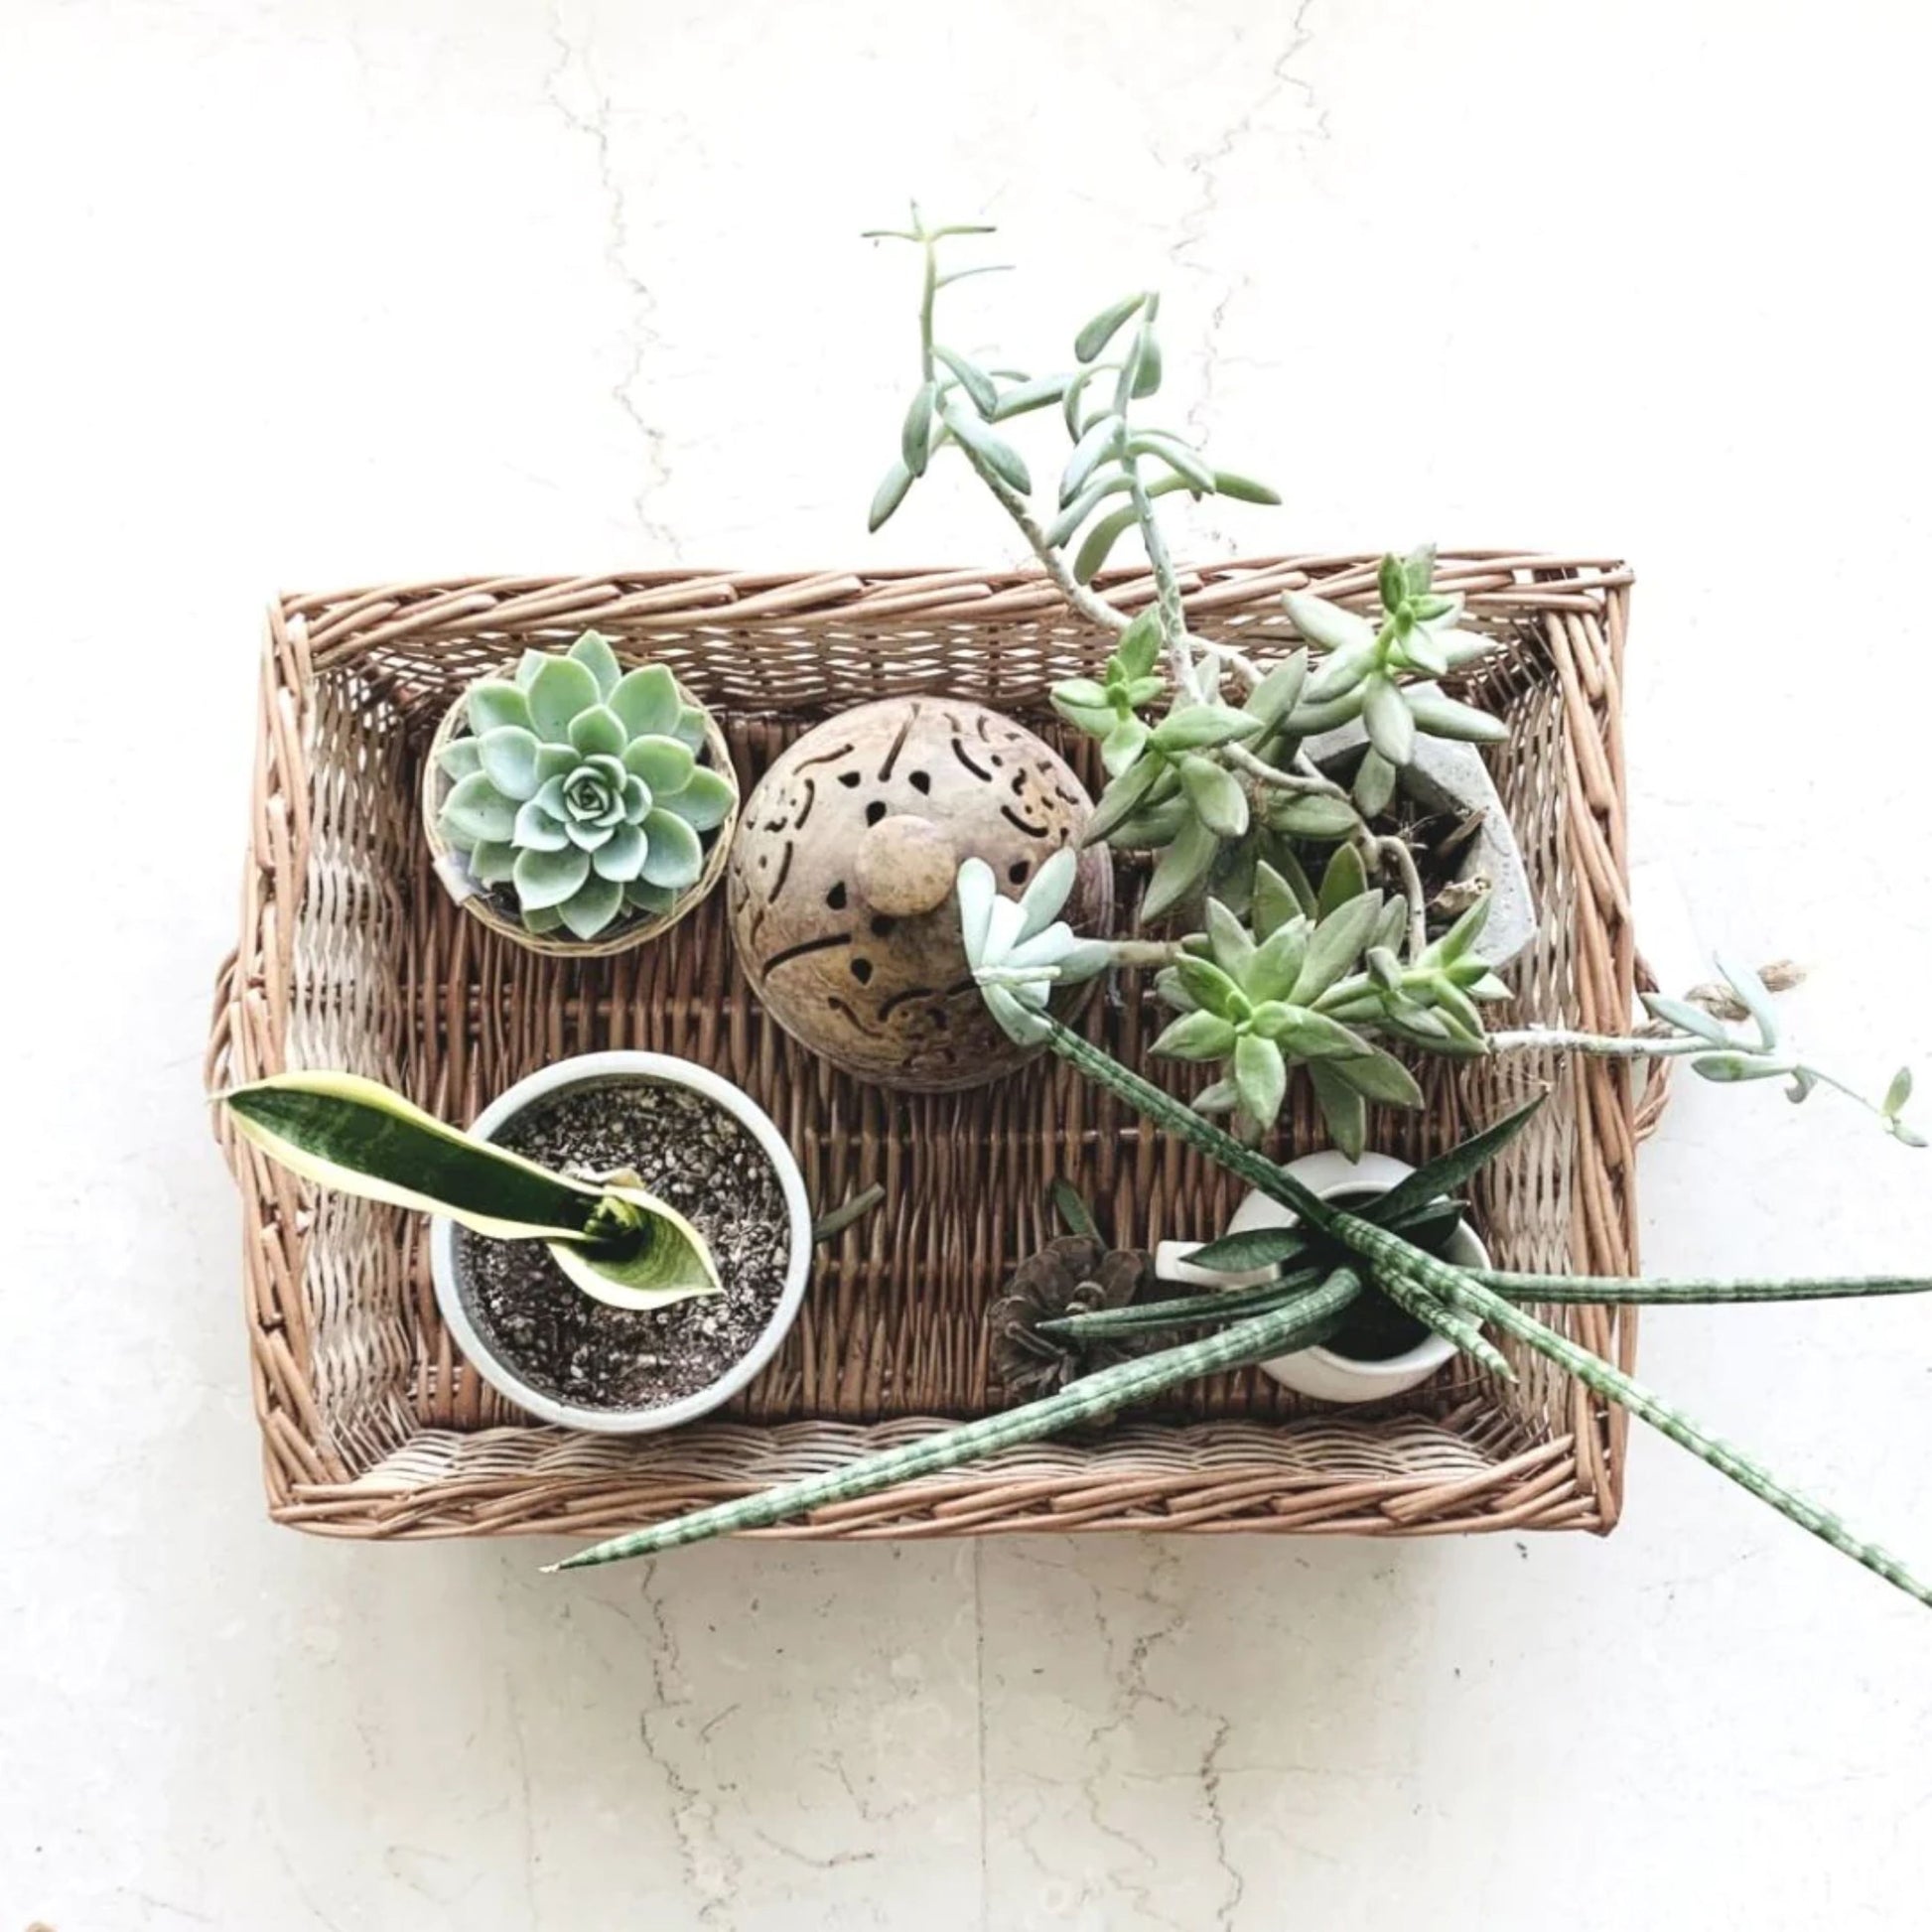 DaisyLife Natural Willow Wicker Tray basket, Flower Basket, Gift Basket, Storage and home decor basket